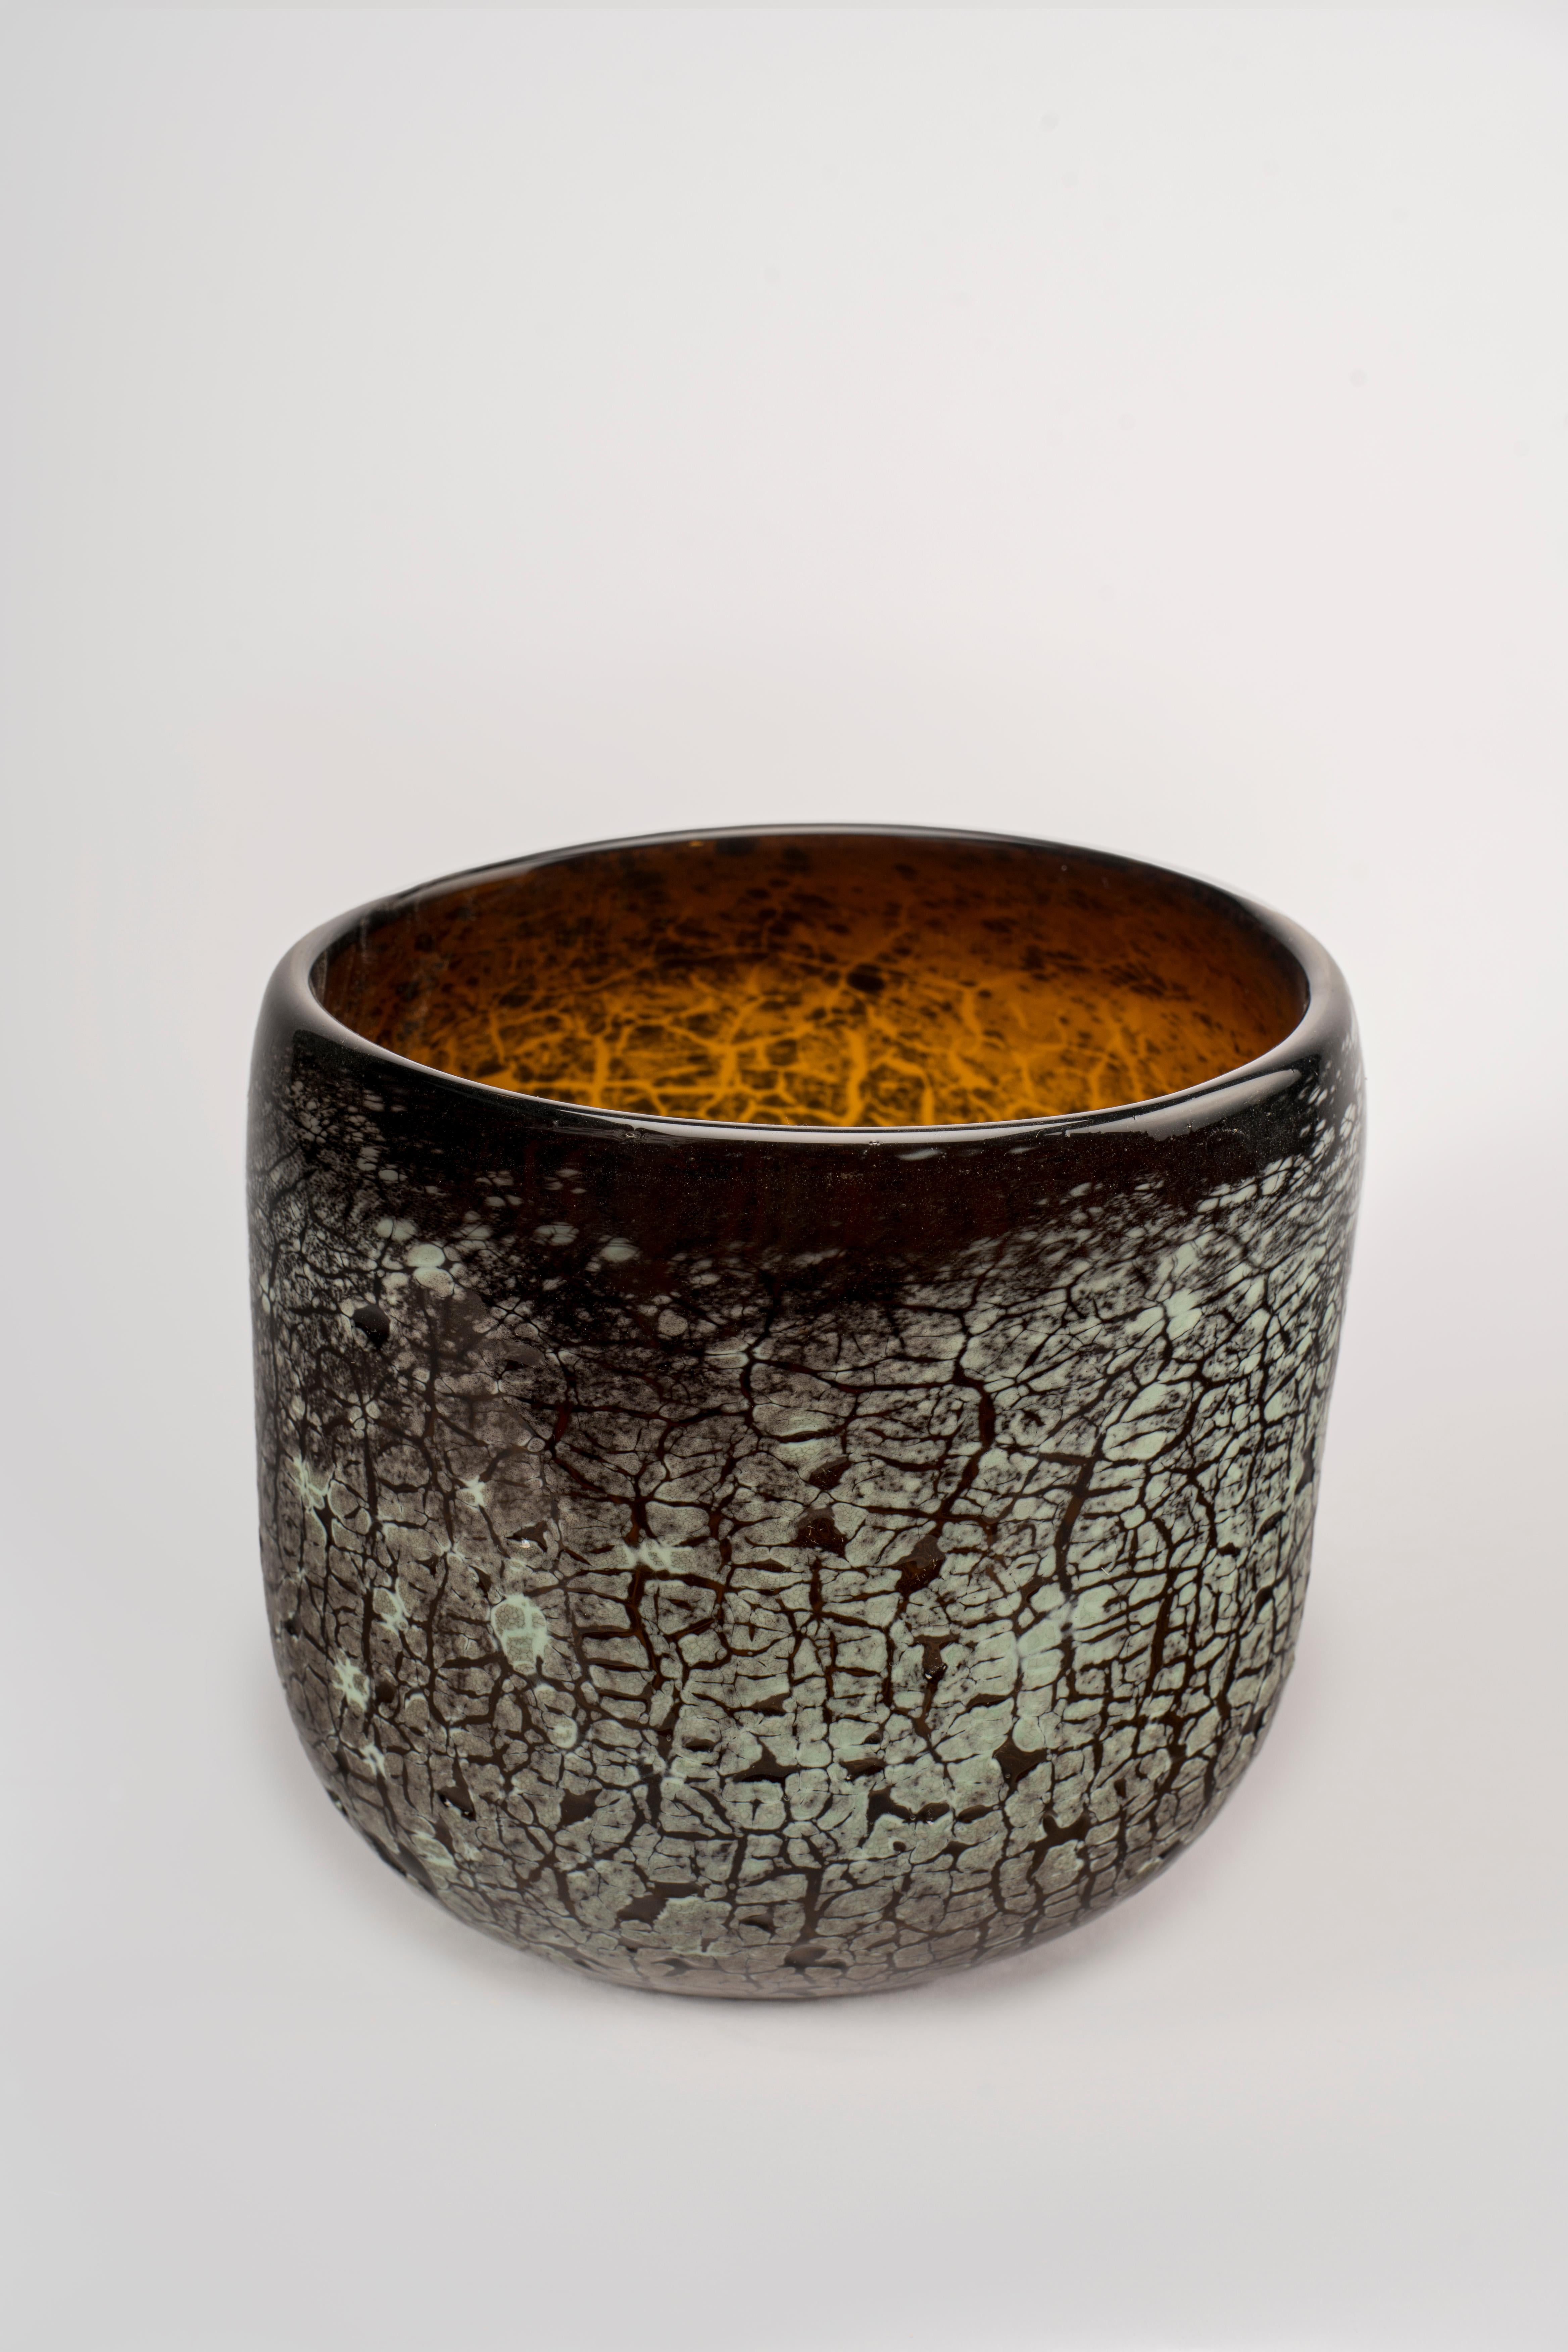 The Barren Bliss made by Glass artist Brent Sheehan, is a beautiful piece of art that captures the essence of an earthen look while still maintaining its delicate and intricate glass construction. The vase has a unique crackle effect, created by